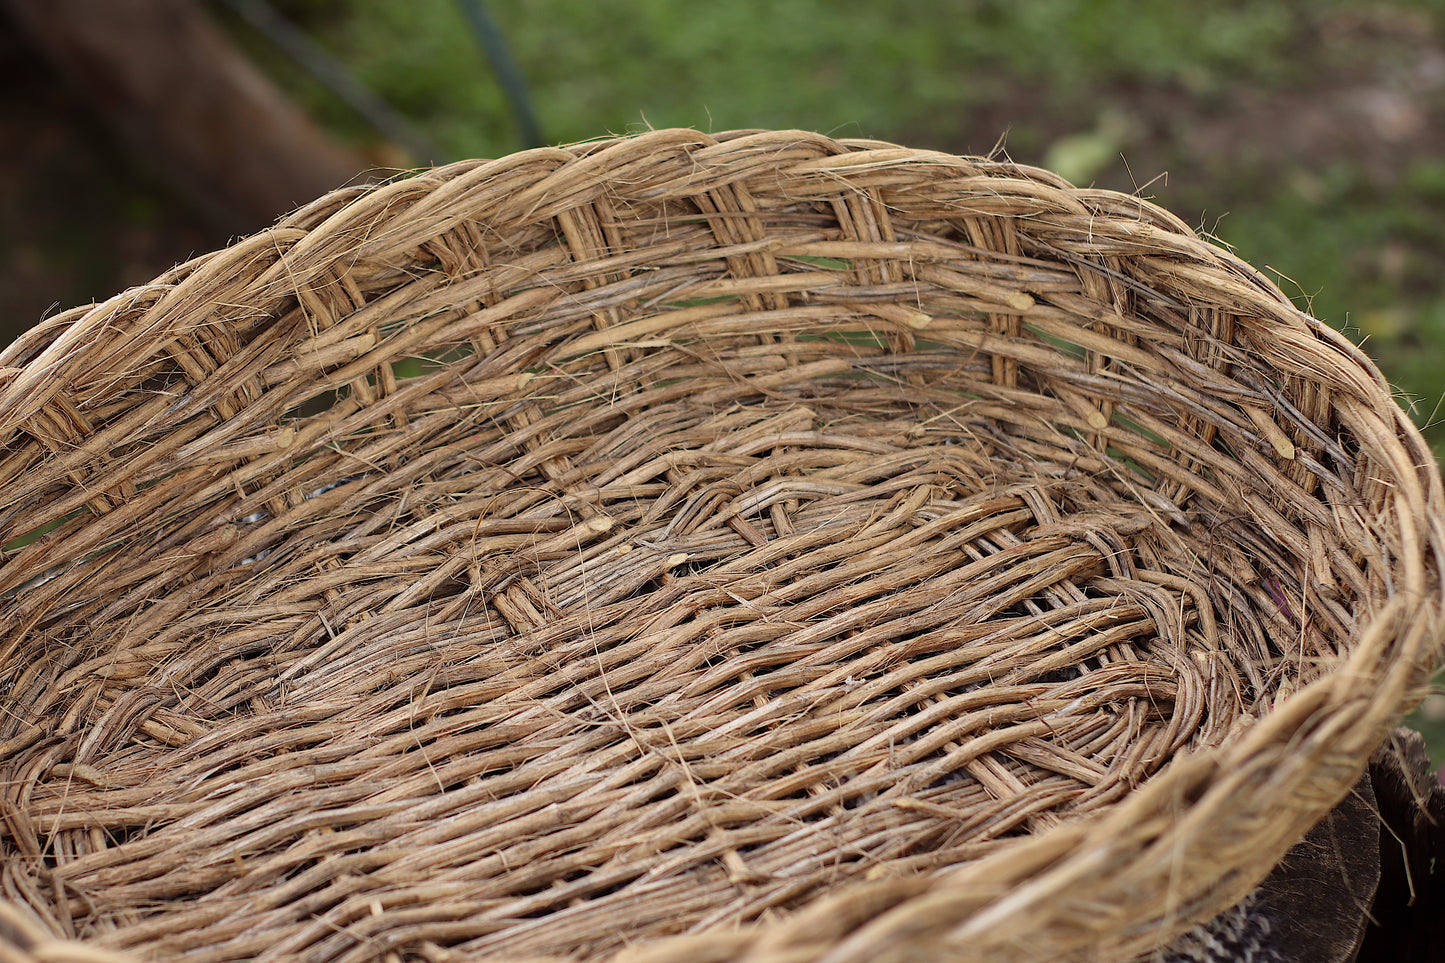 Basket of Pennyroyal Branches